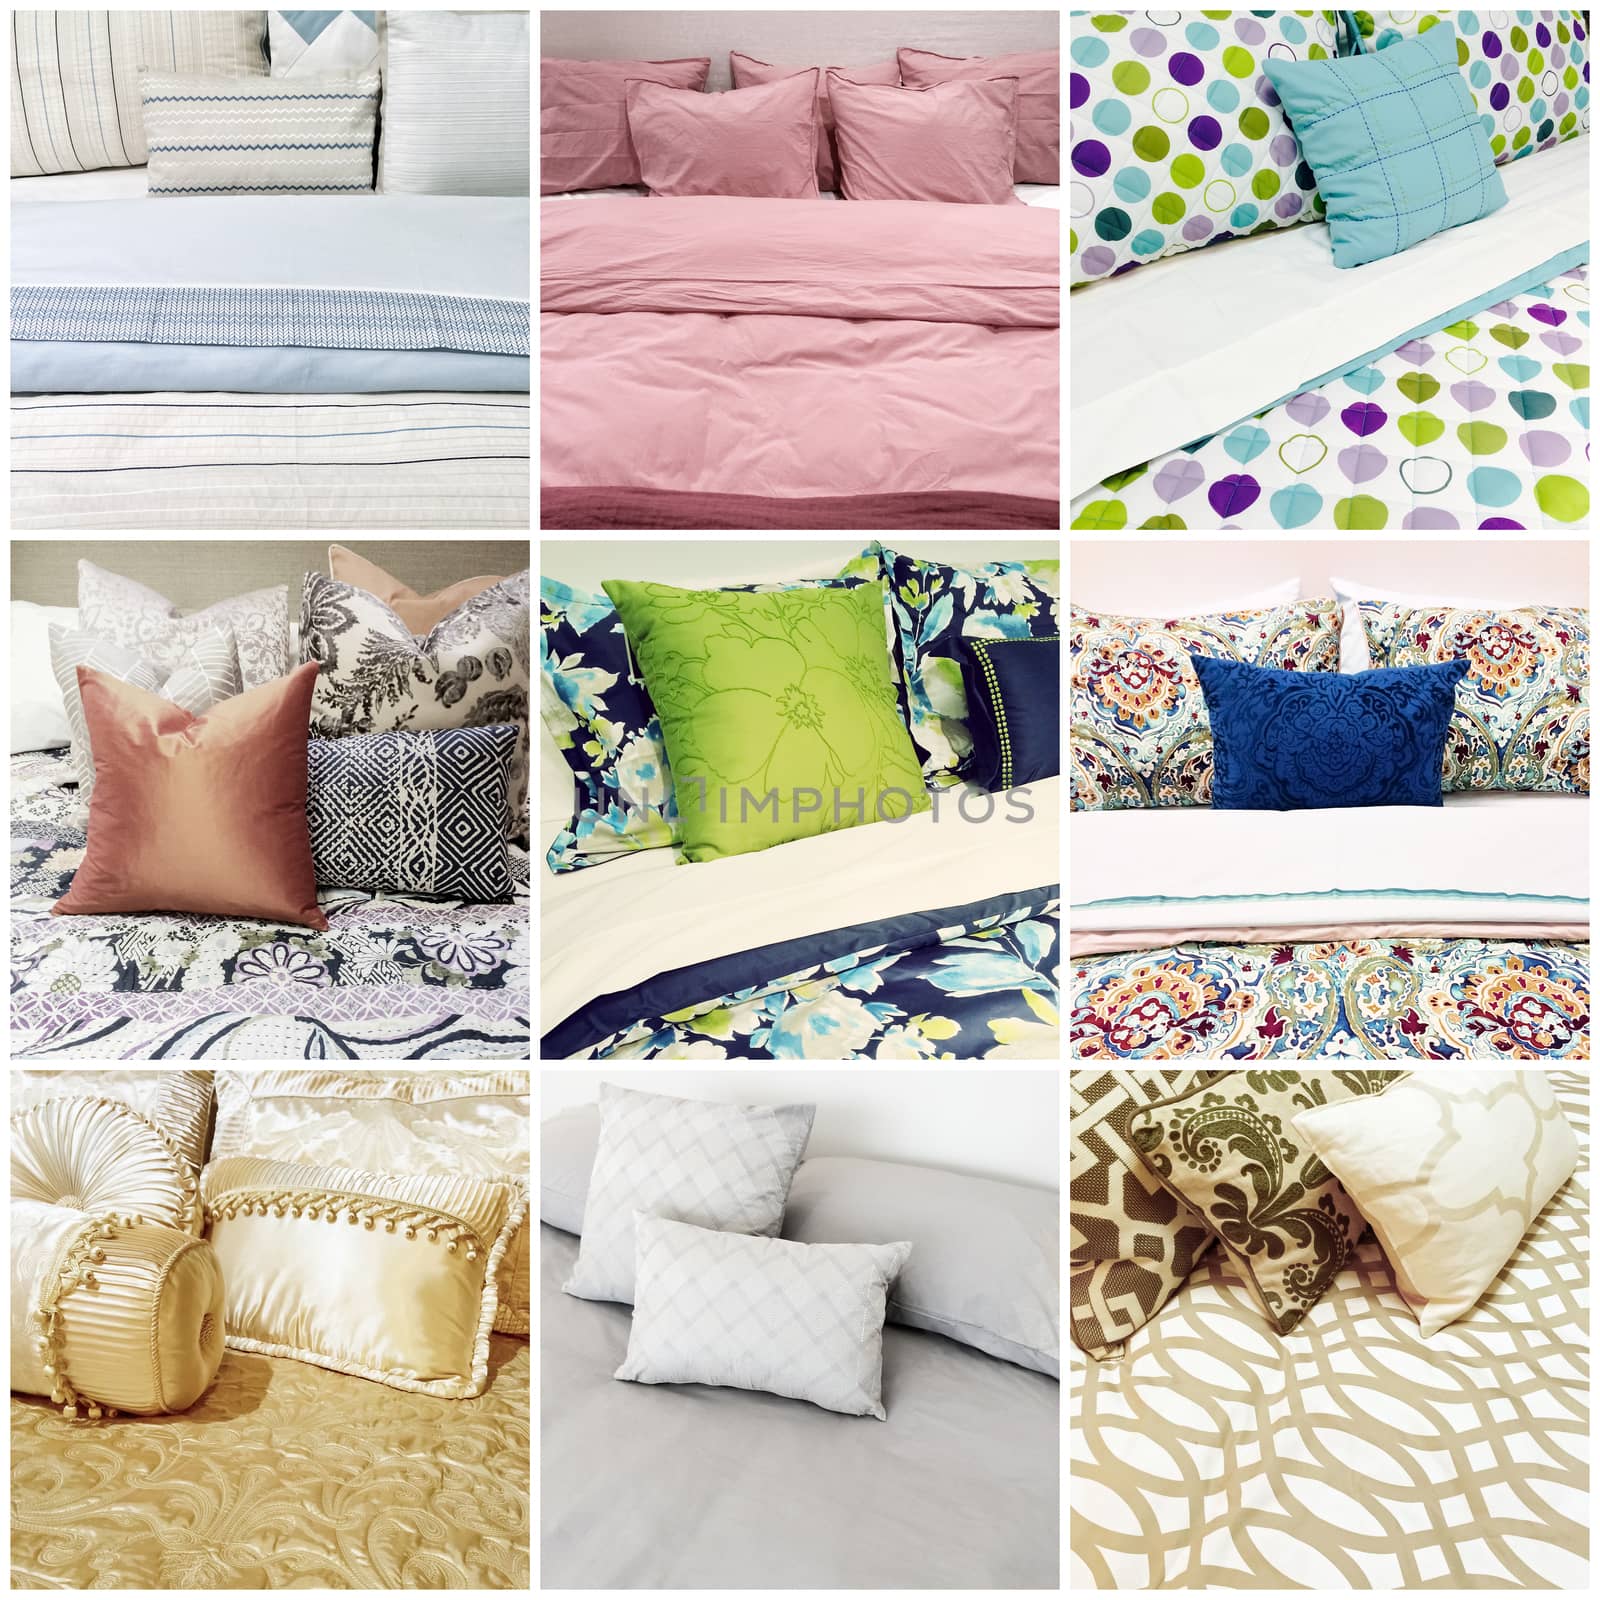 Beds with different styles of bedclothes by anikasalsera